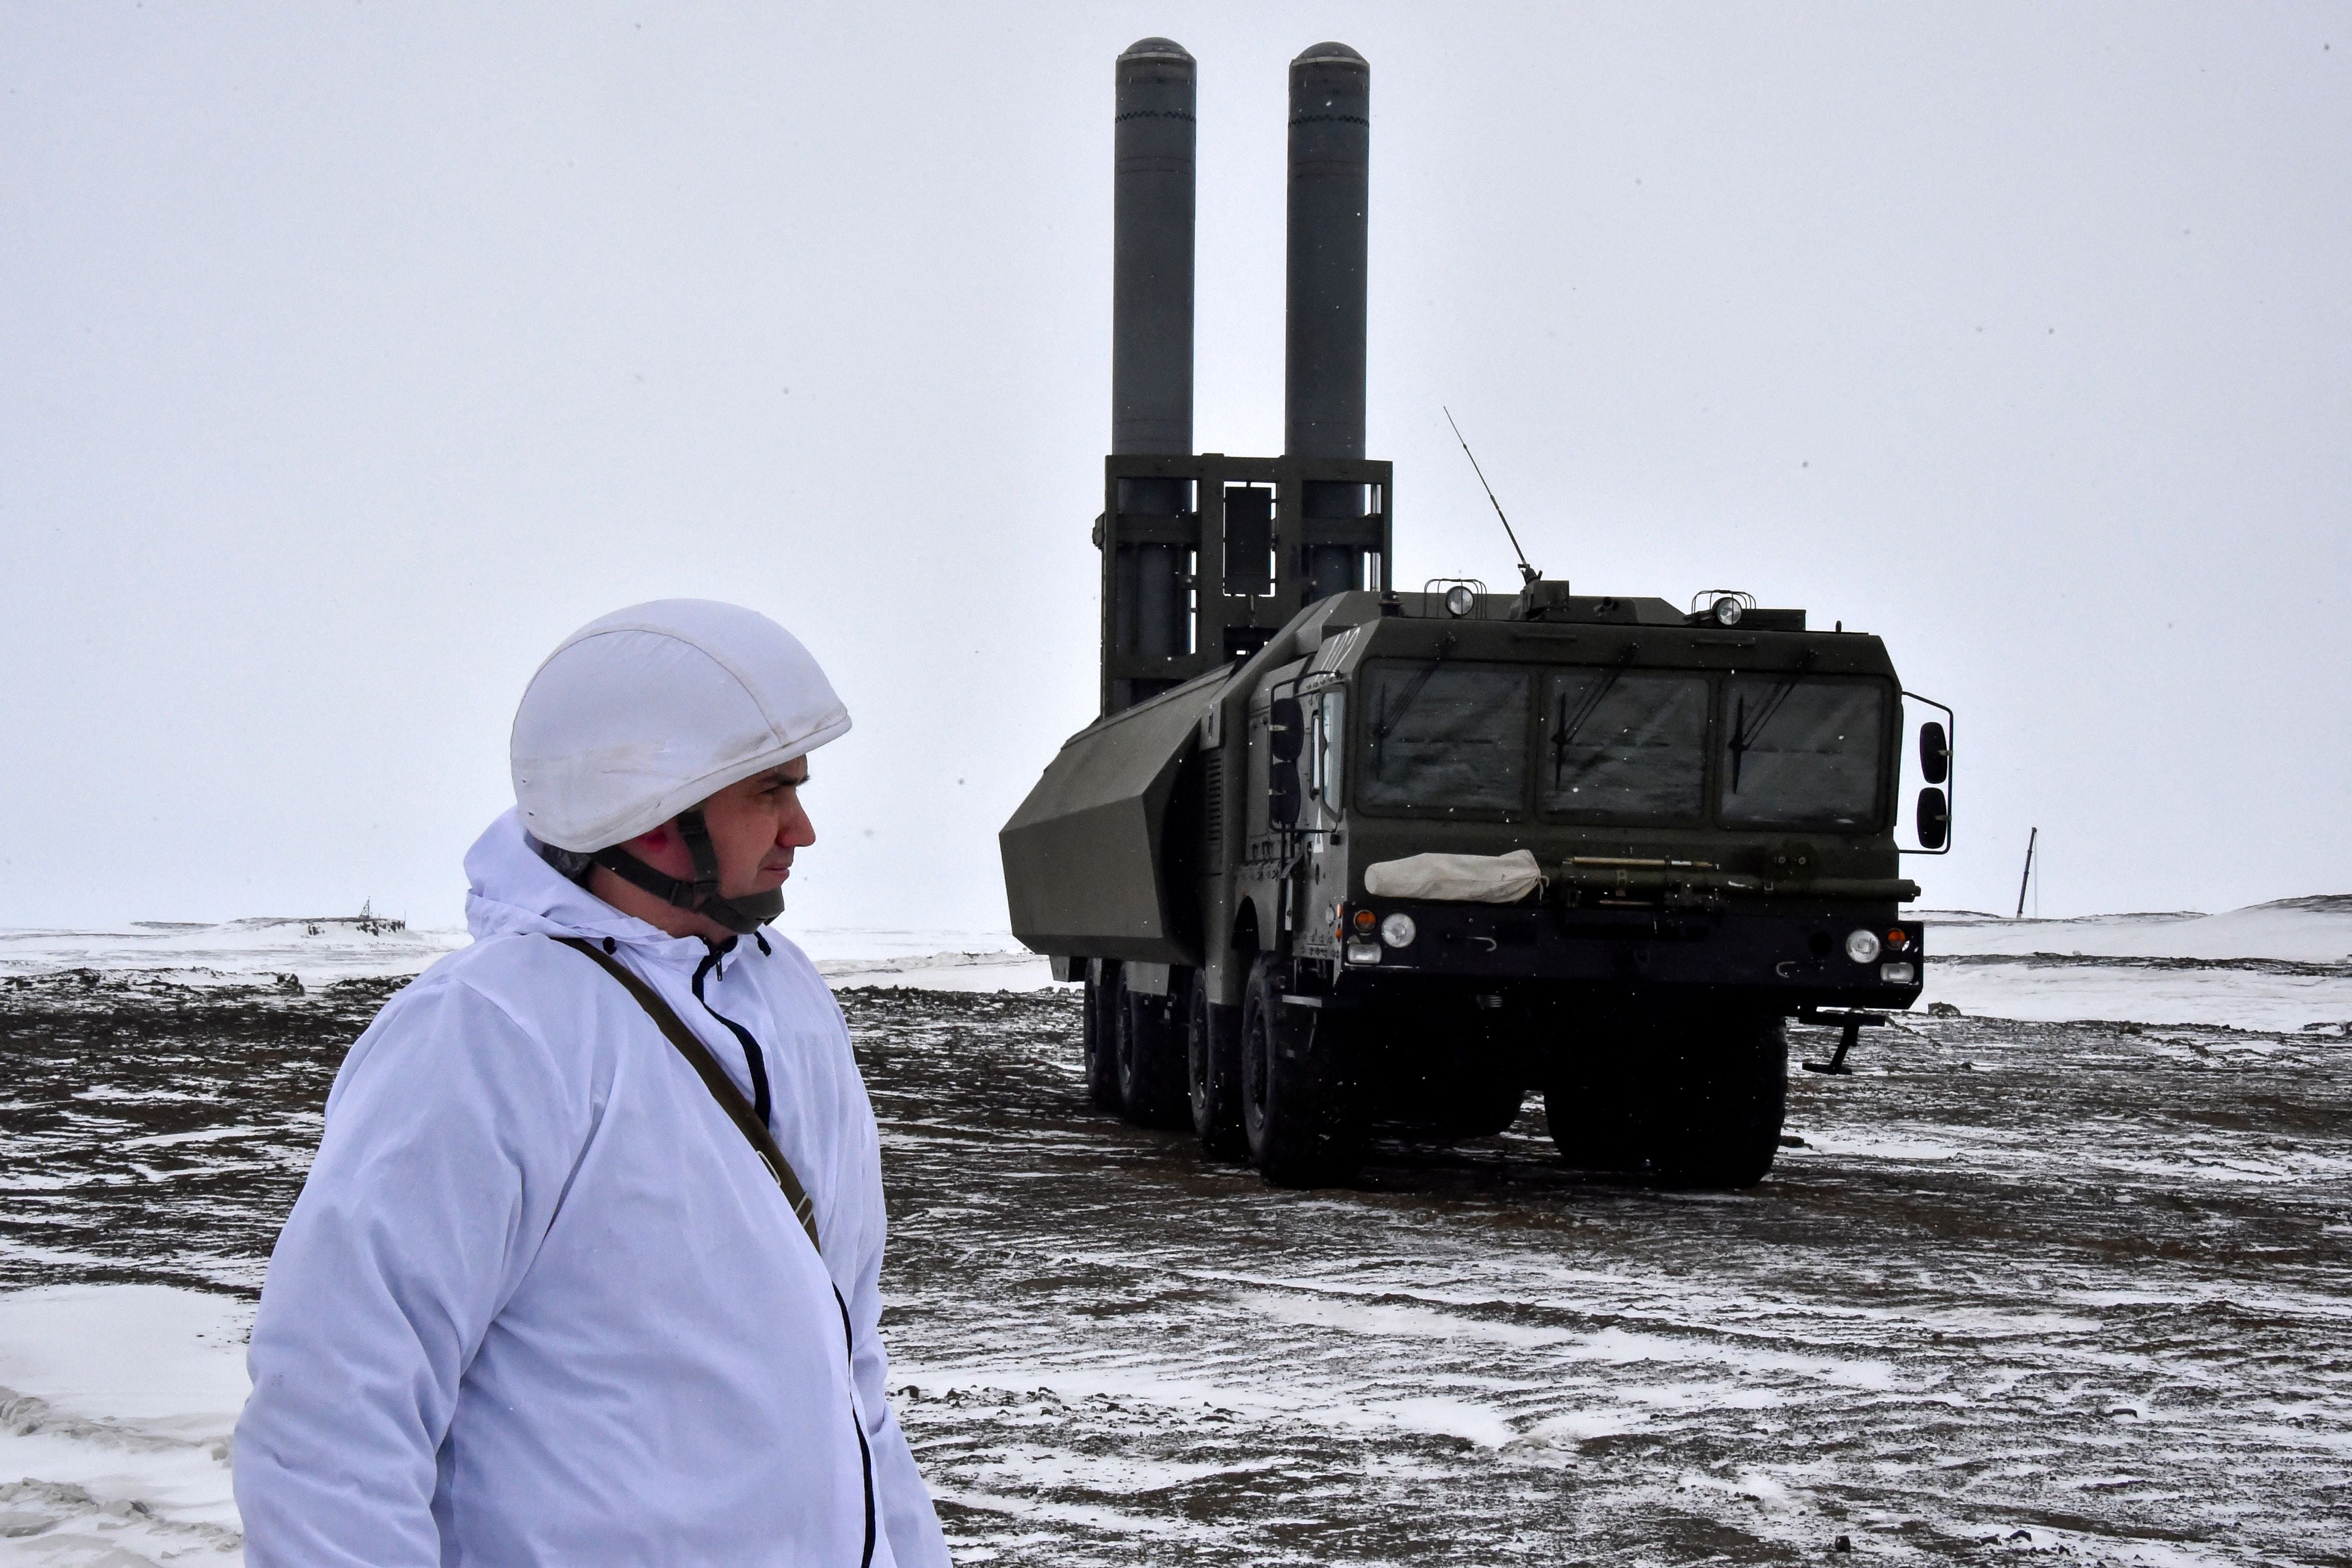 A serviceman stands near a Russian Bastion mobile coastal defence missile system on the island of Alexandra Land